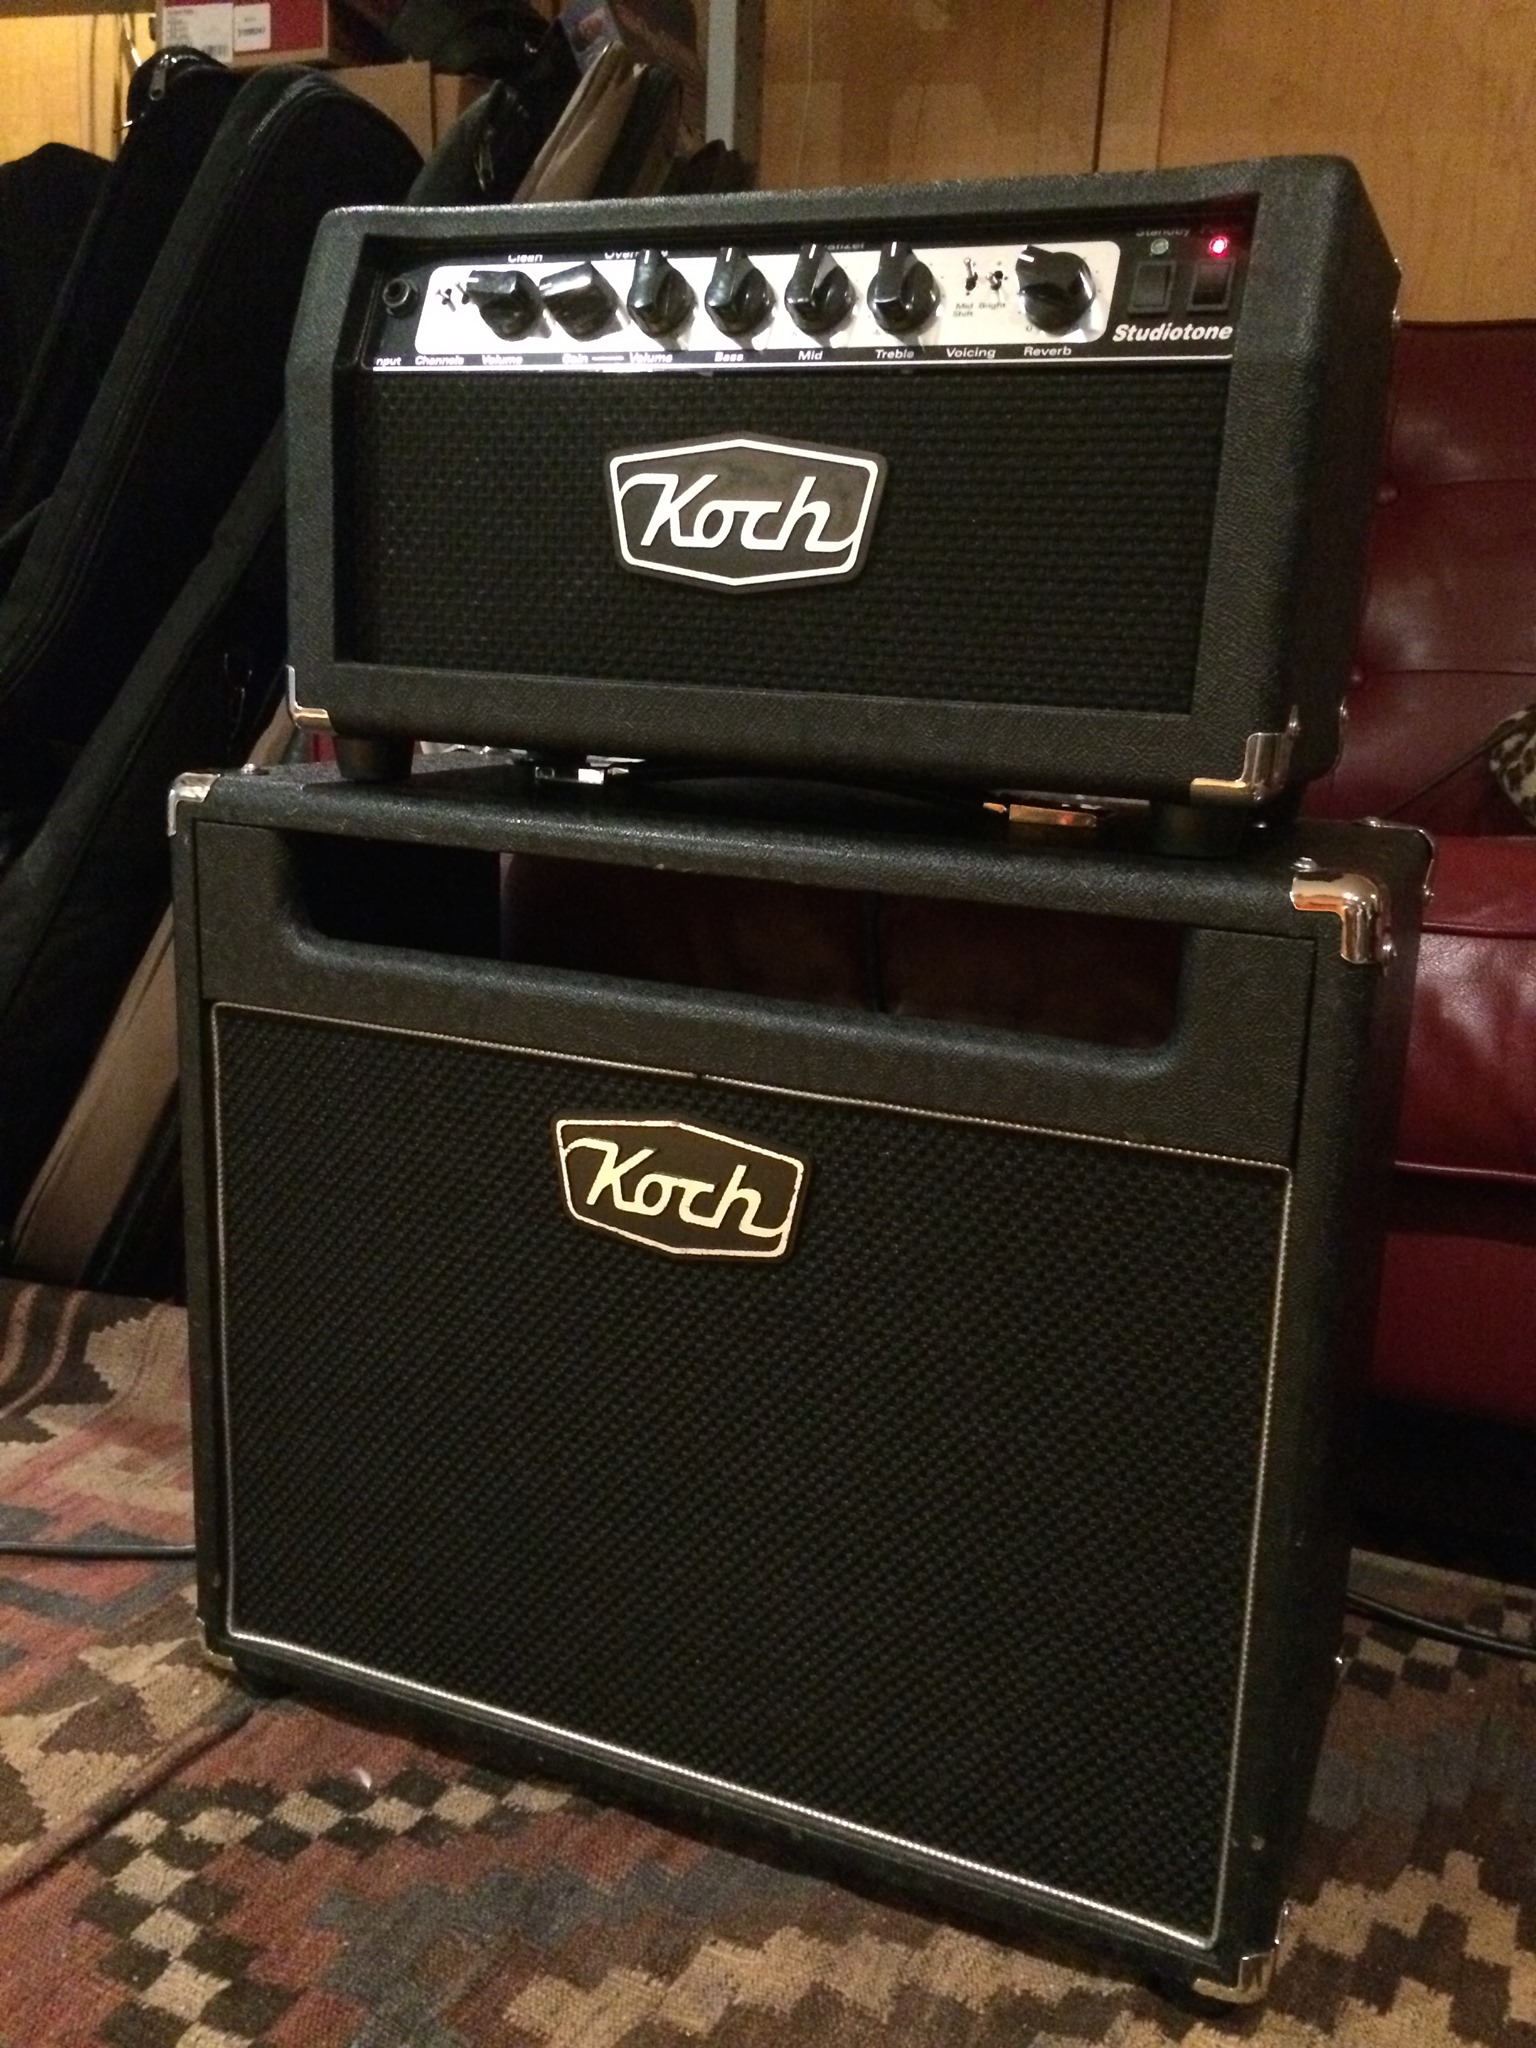 Koch Little Gristle - Killer amp for intensive daily use in (and out) of jazz-koch-koch-jpg